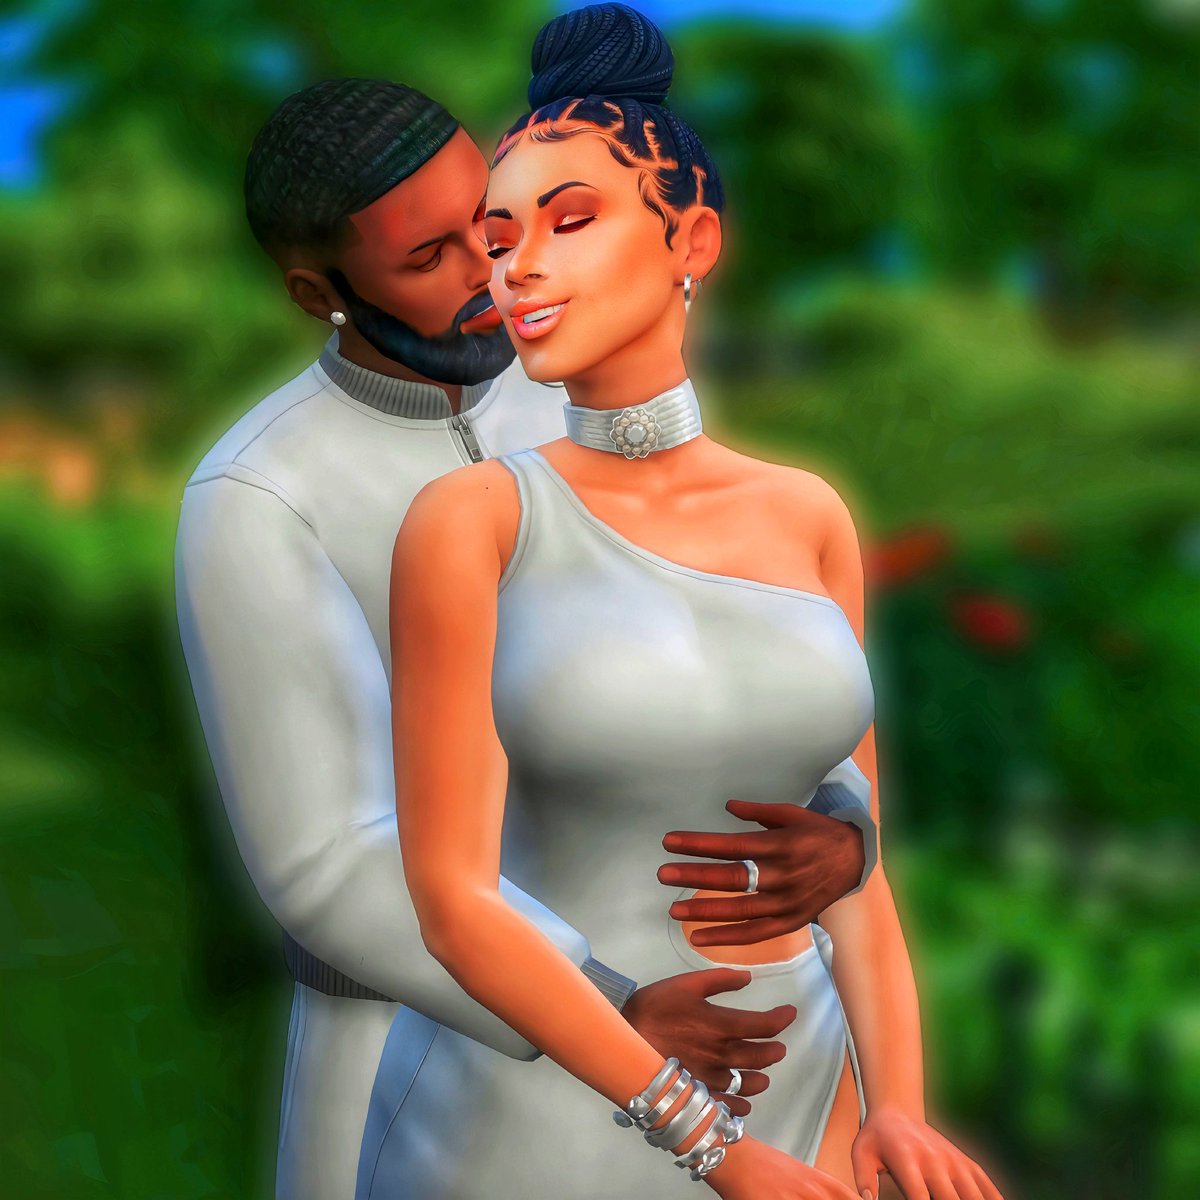 Embrace the love you receive and you will feel the magic

#mlxoxo #thesims4 #ts4 #sims4 #photoediting #photoenhancement #gaming #gamingphotography #simstagram #simsphotography #showusyoursims #sims #simslife